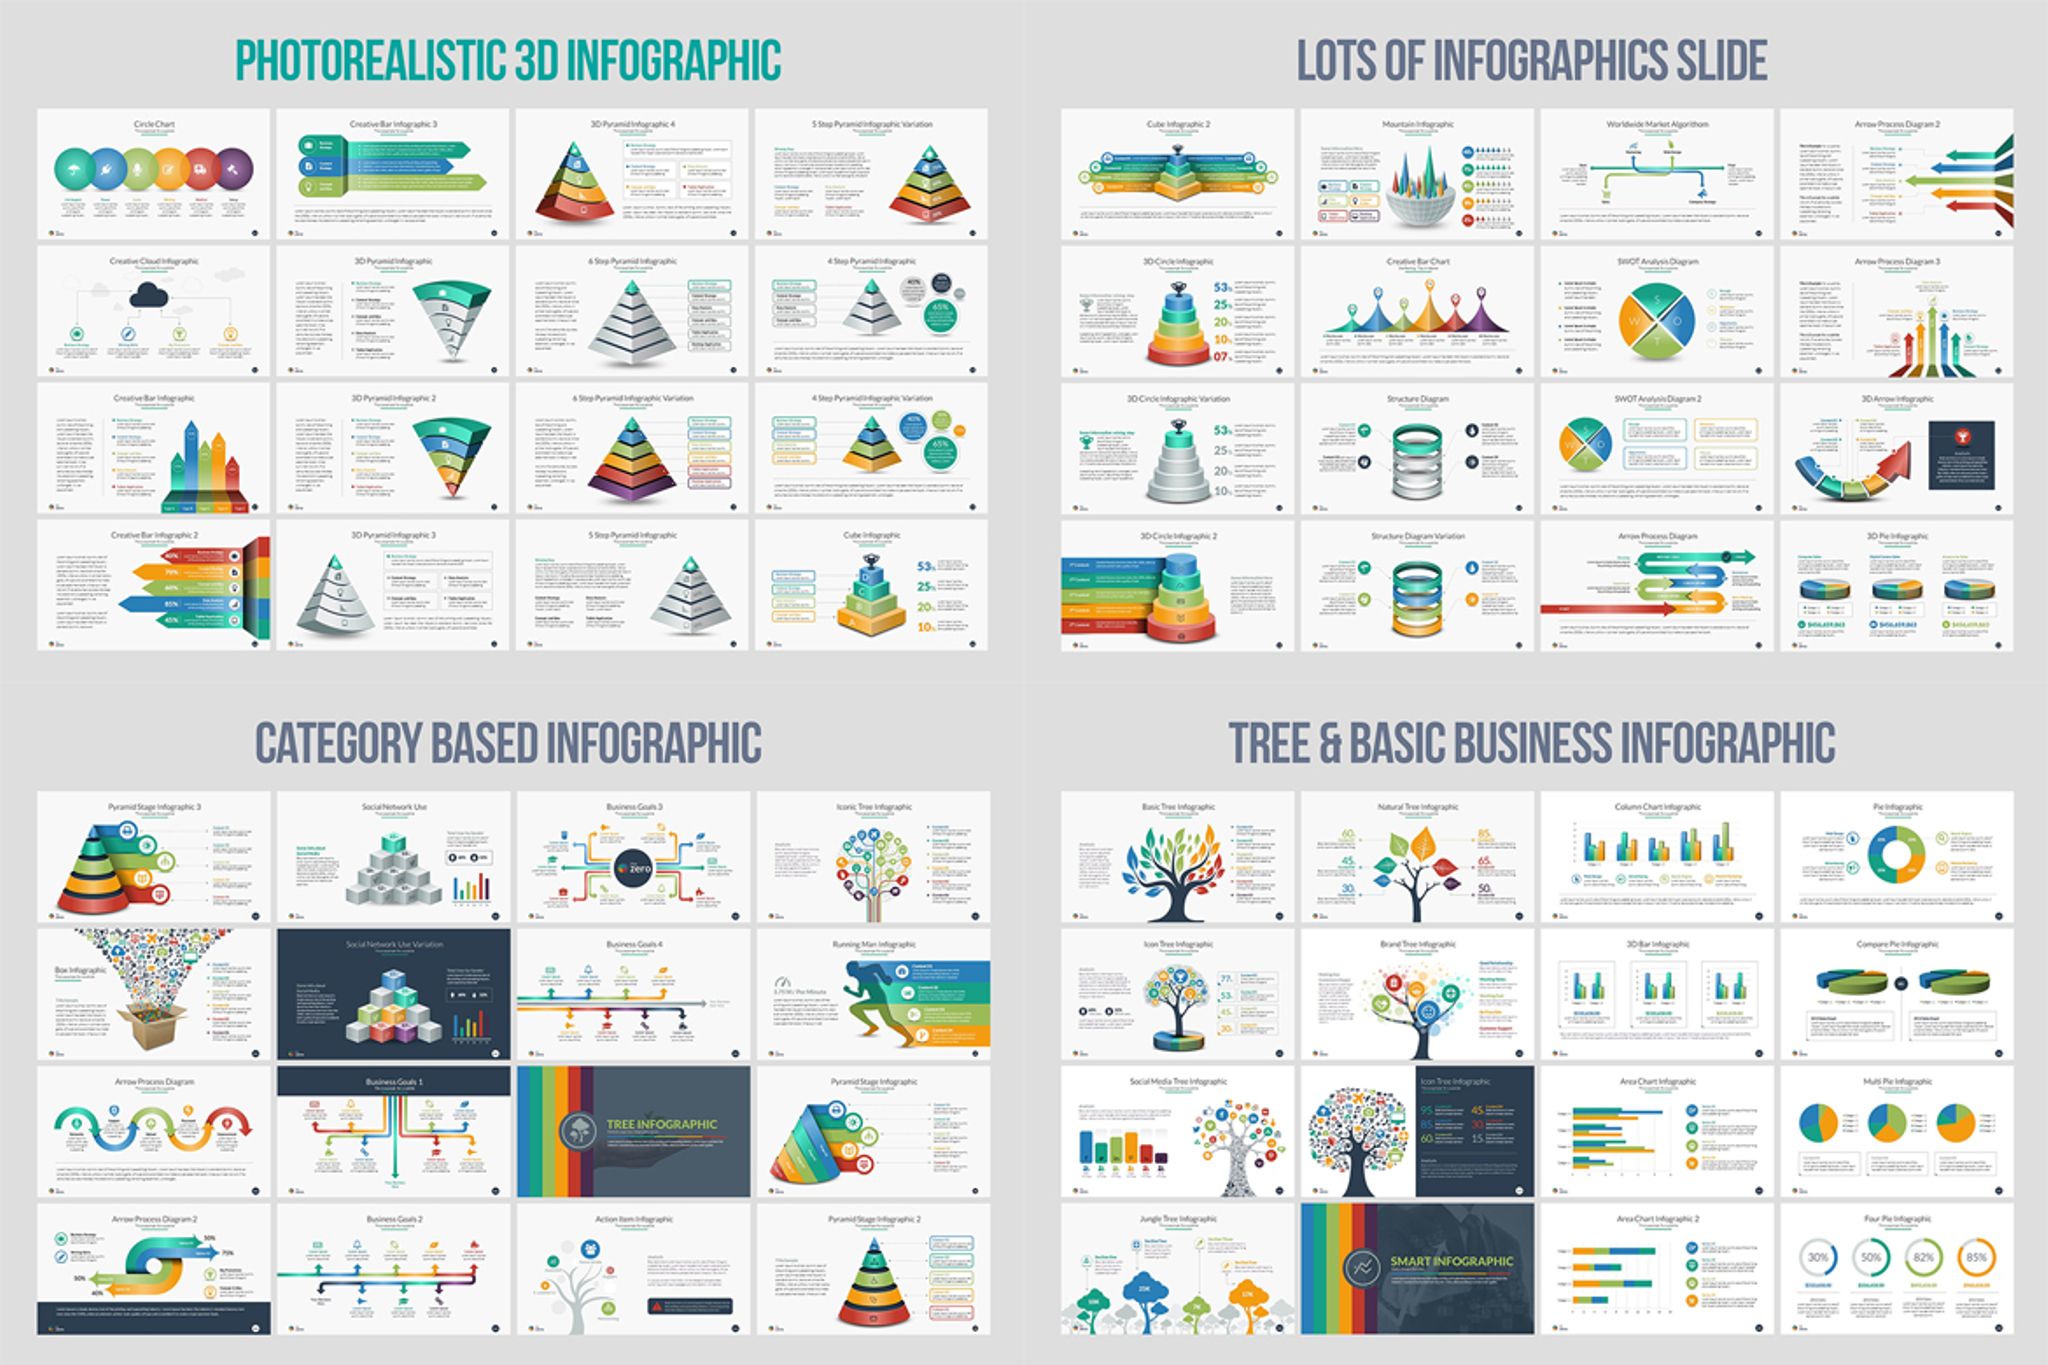 40+ Best Infographics PowerPoint (PPT) Templates for Presentations, 2021 - SlideSalad